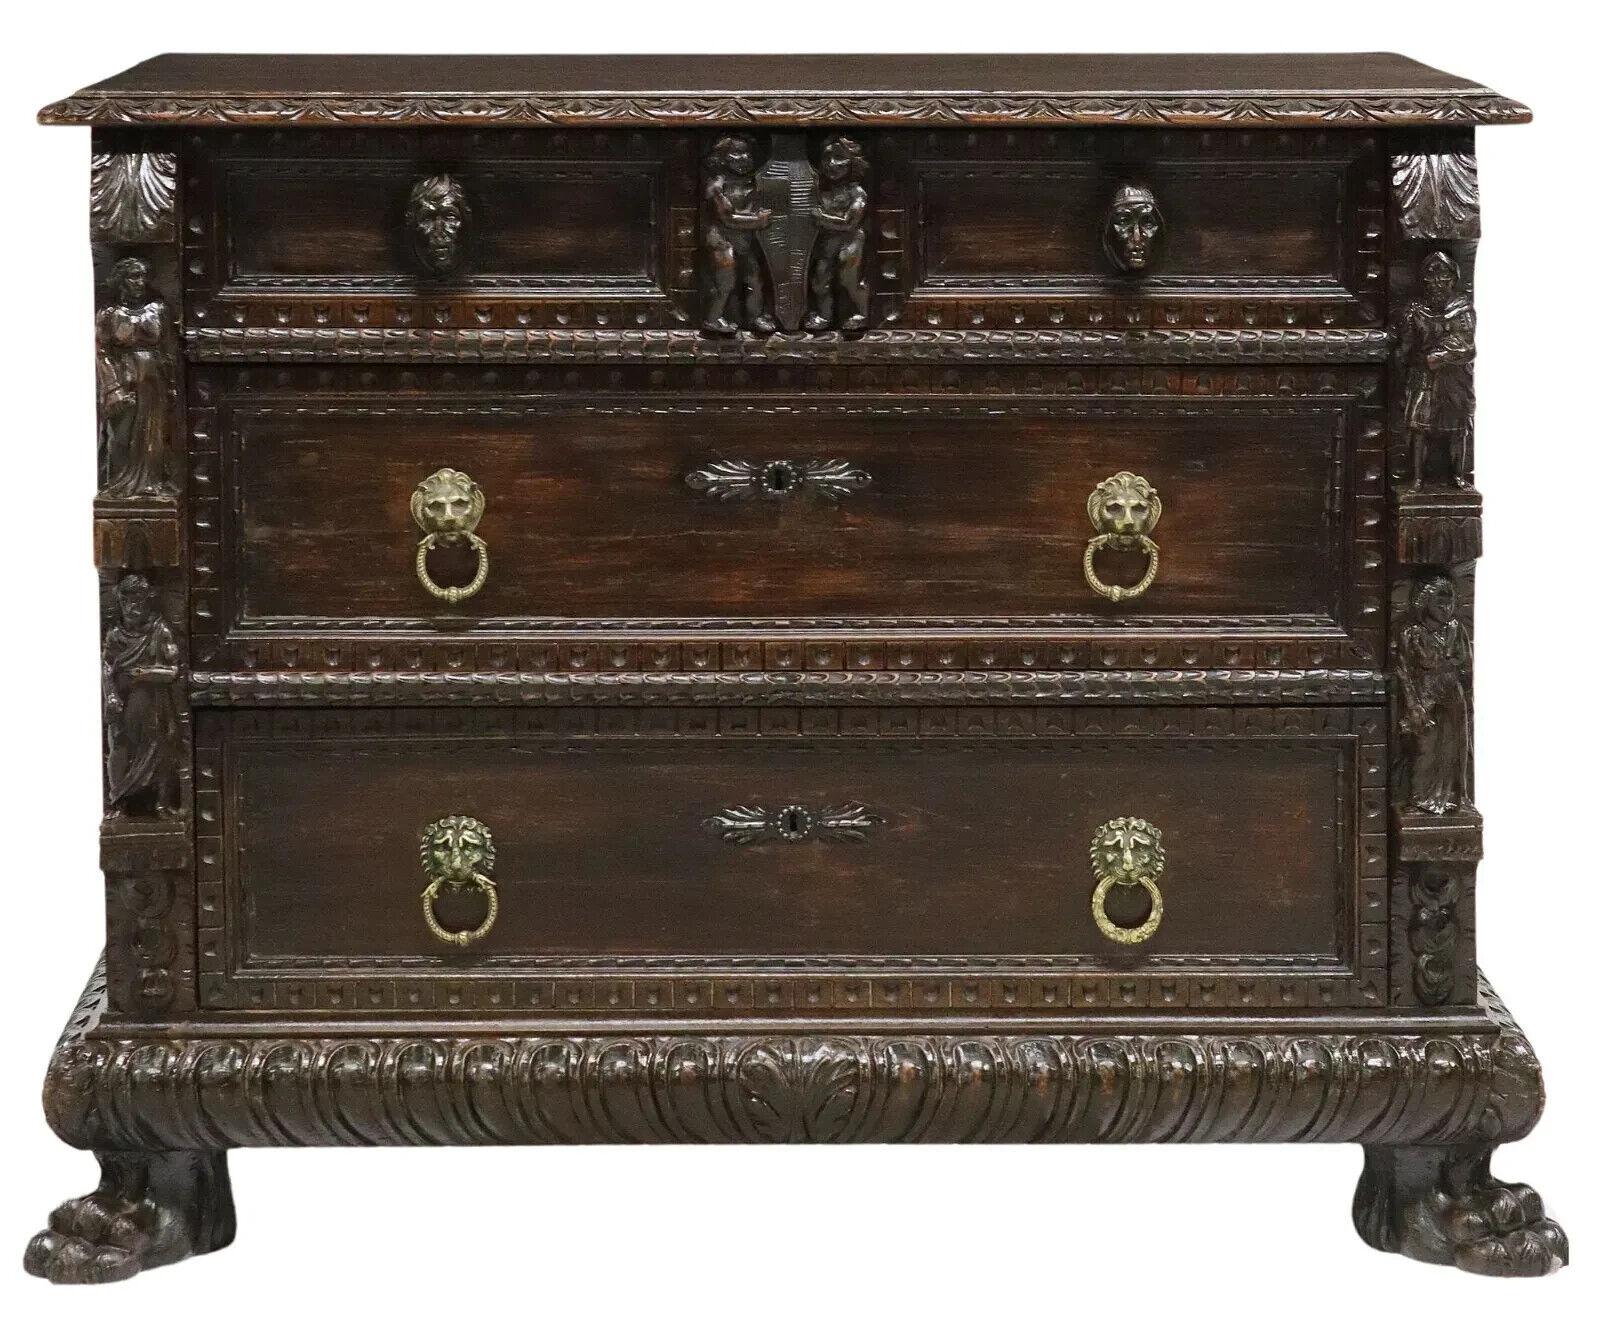 Stunning 1800's Antique  Italian Renaissance Revival, Figural, Drawers. Carved Commode!!

Italian Renaissance Revival commode, 19th c., three drawers framed by carved figures, top drawer centered by putti supporting a shield, on lion's paw feet,